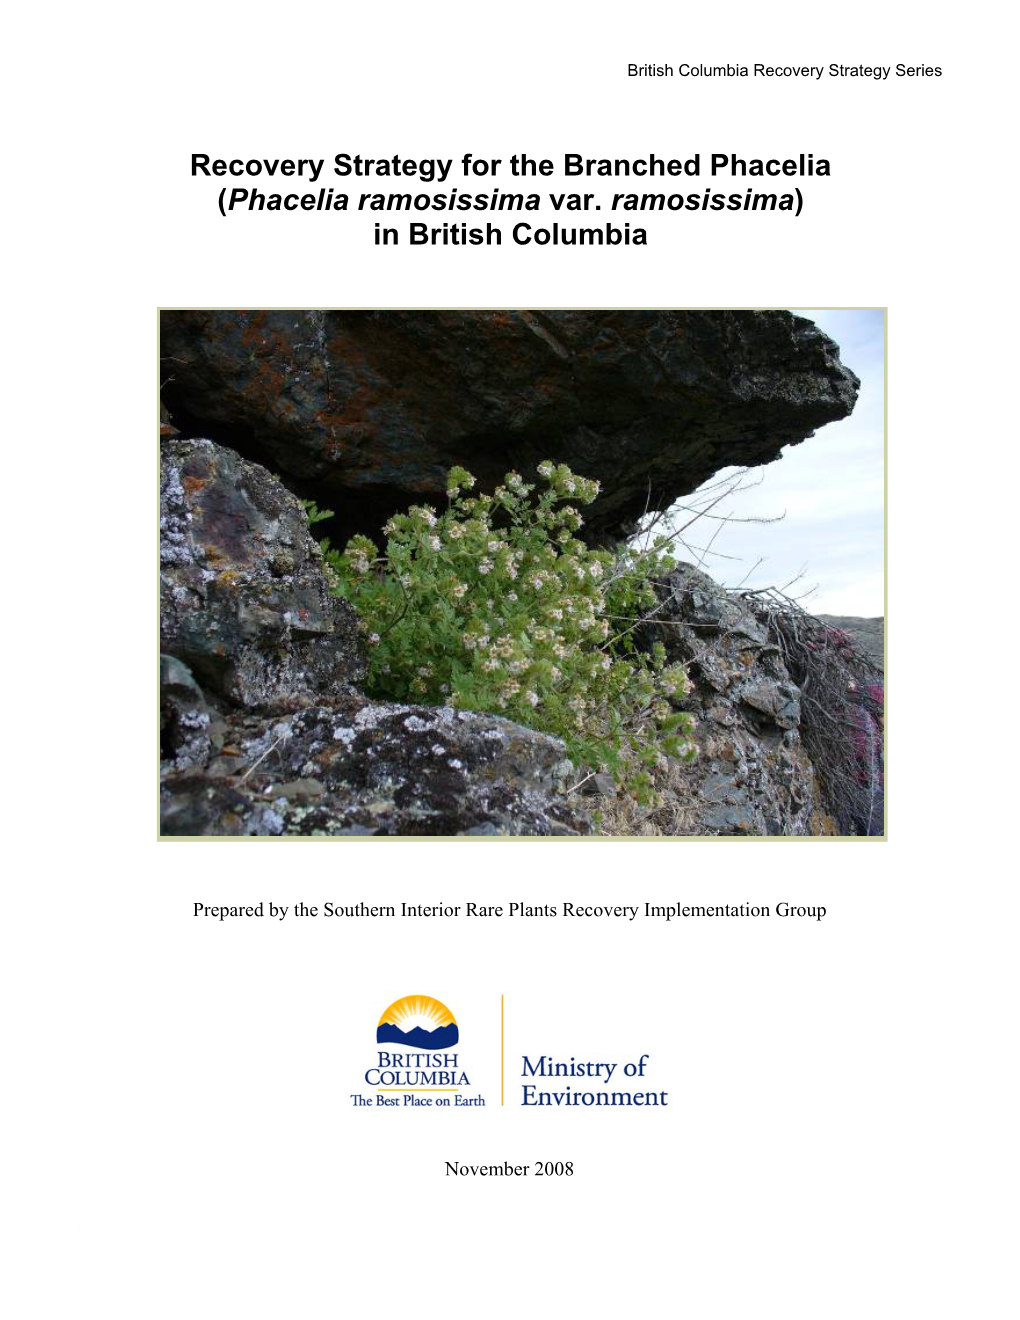 Recovery Strategy for the Branched Phacelia (Phacelia Ramosissima Var